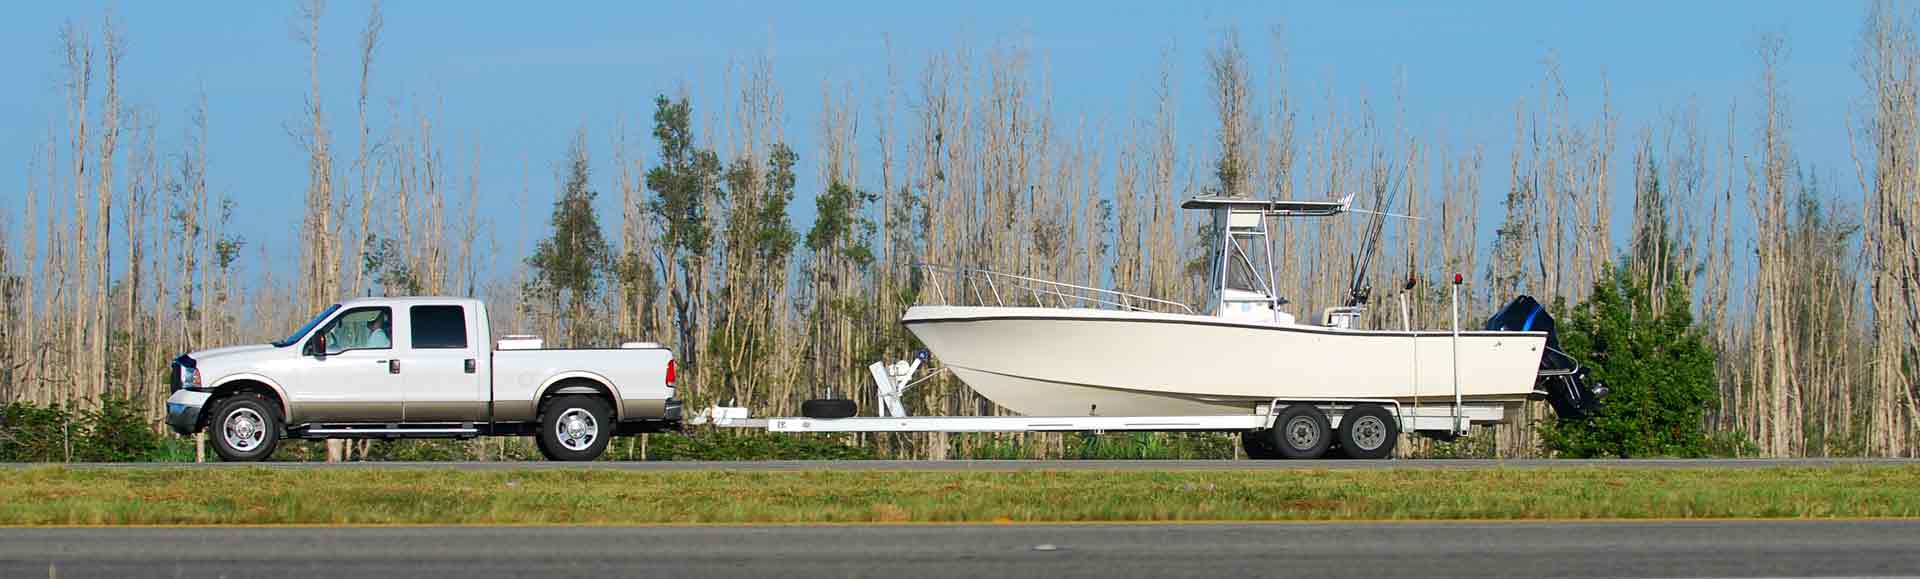 Find Custom Quality Trailers for any Boat or Yacht in at Boat America